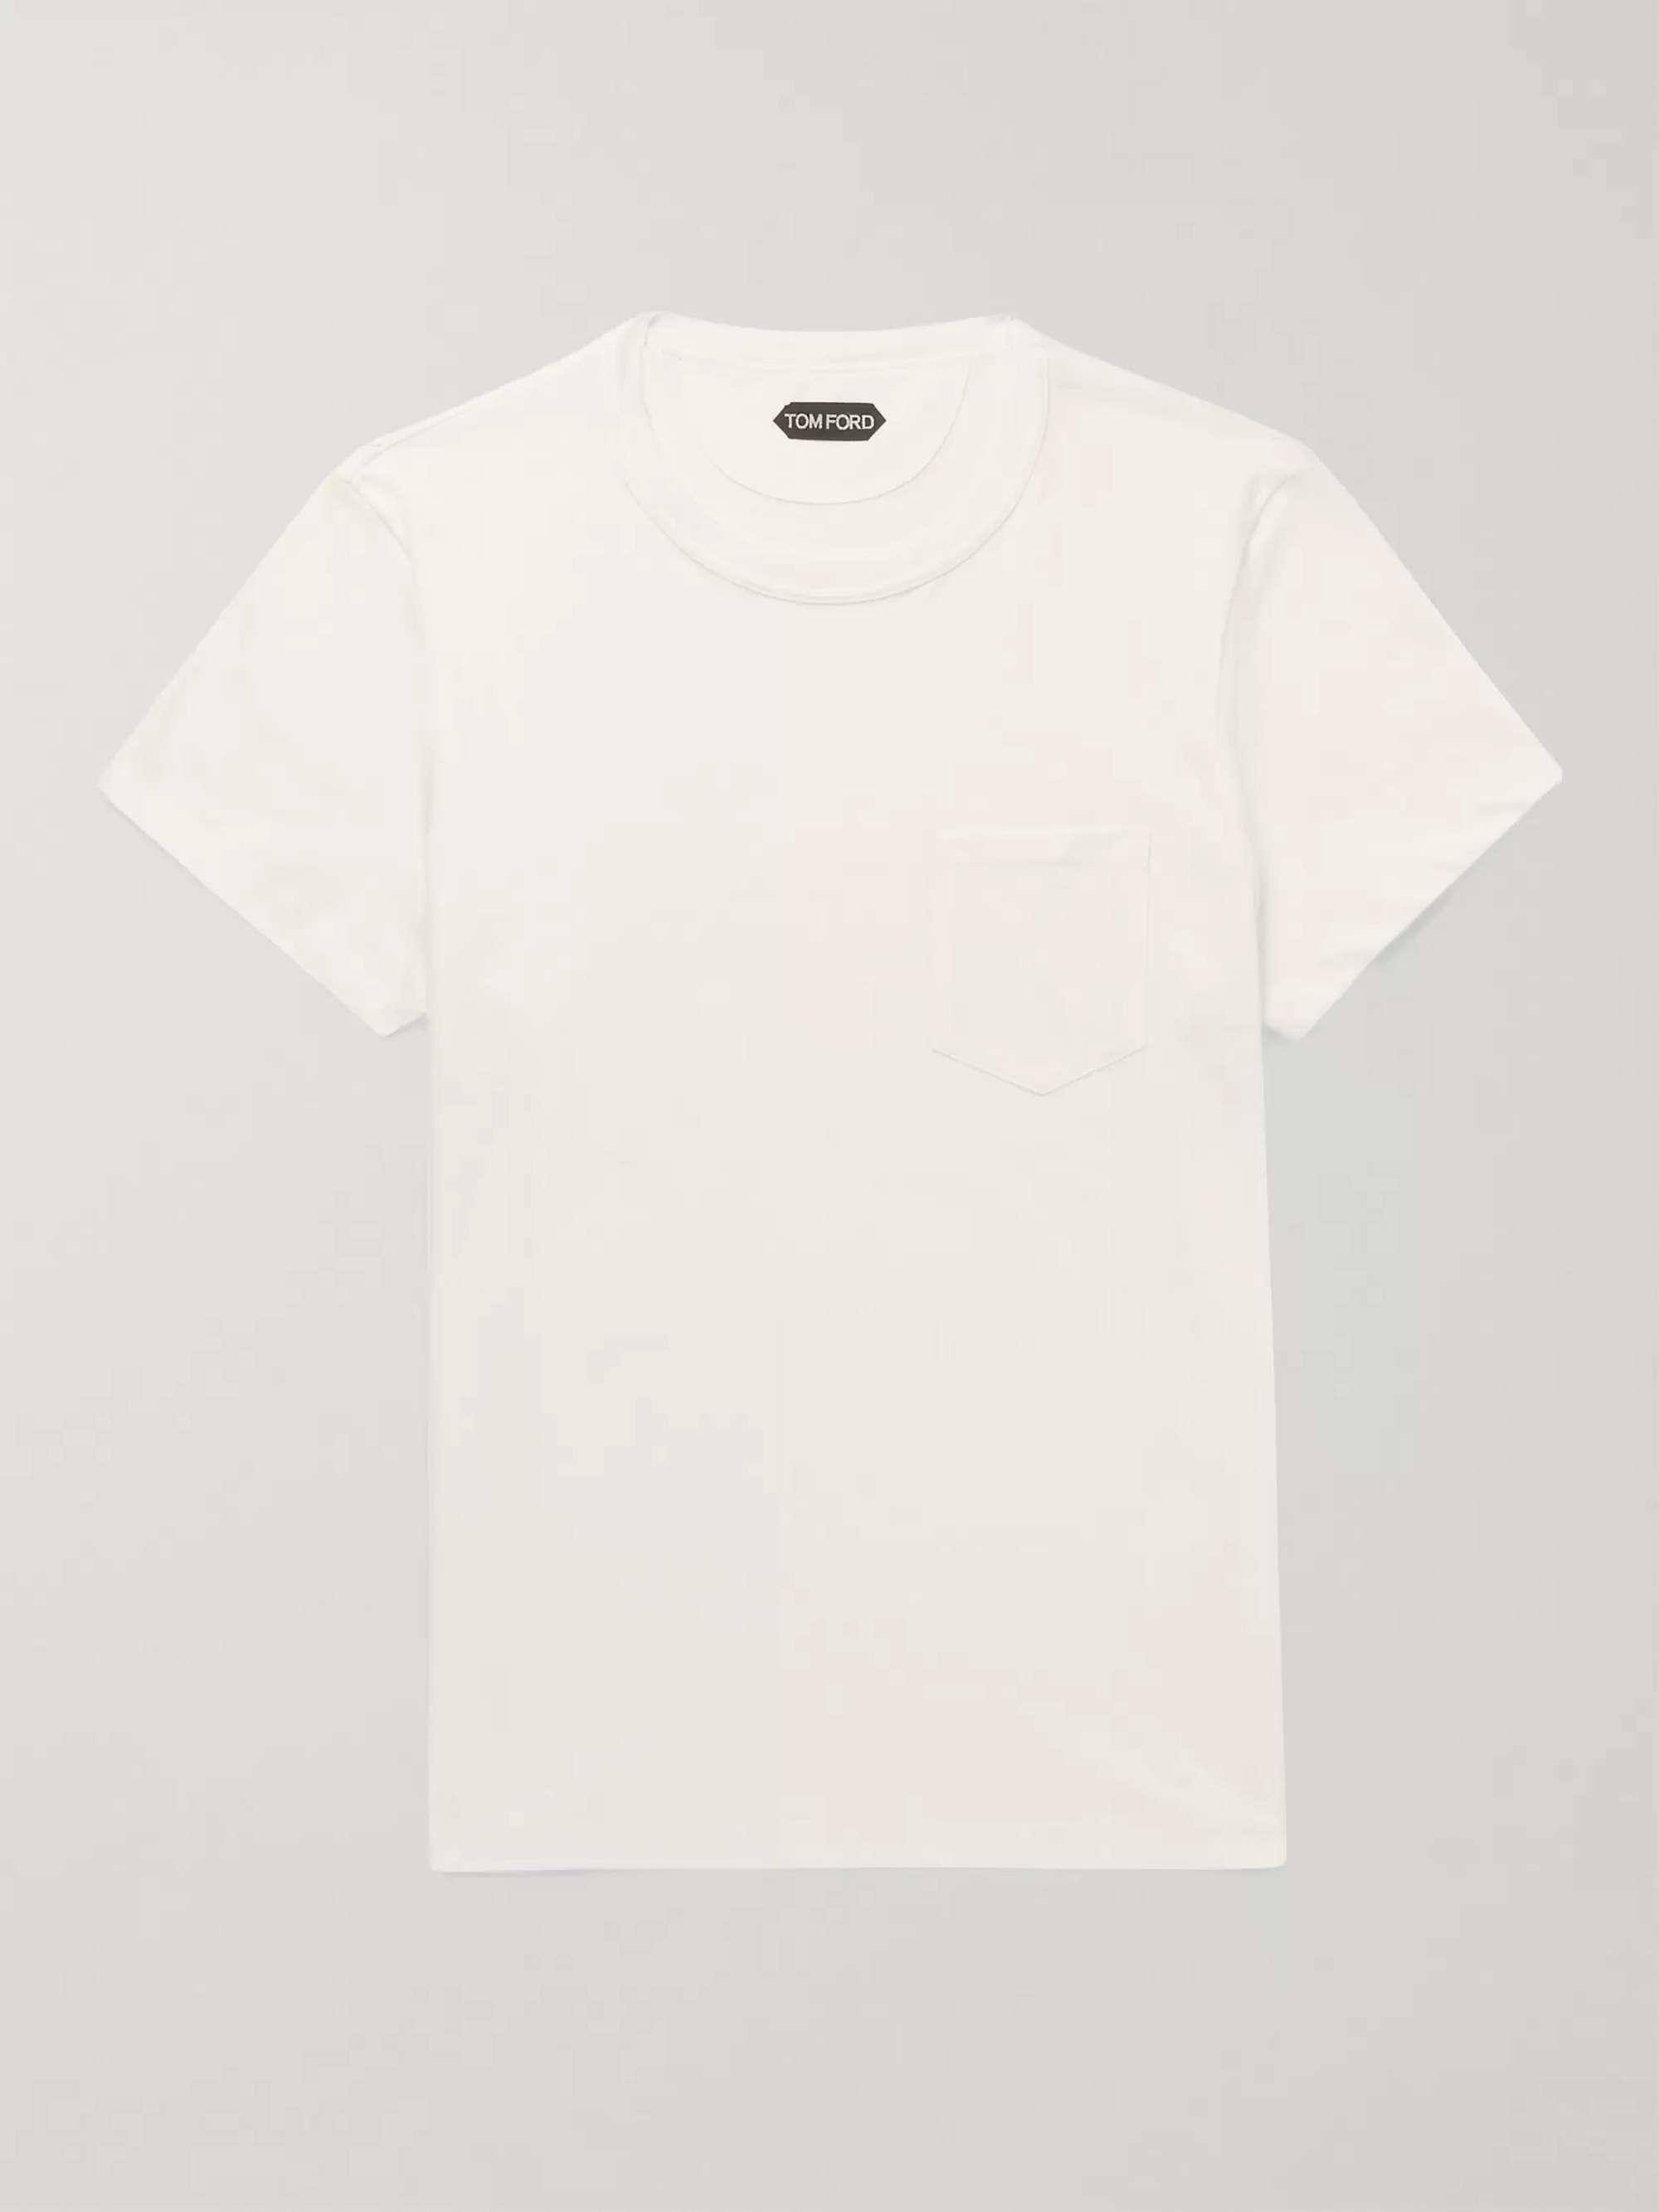 TOM FORD Cotton-Jersey T-Shirt